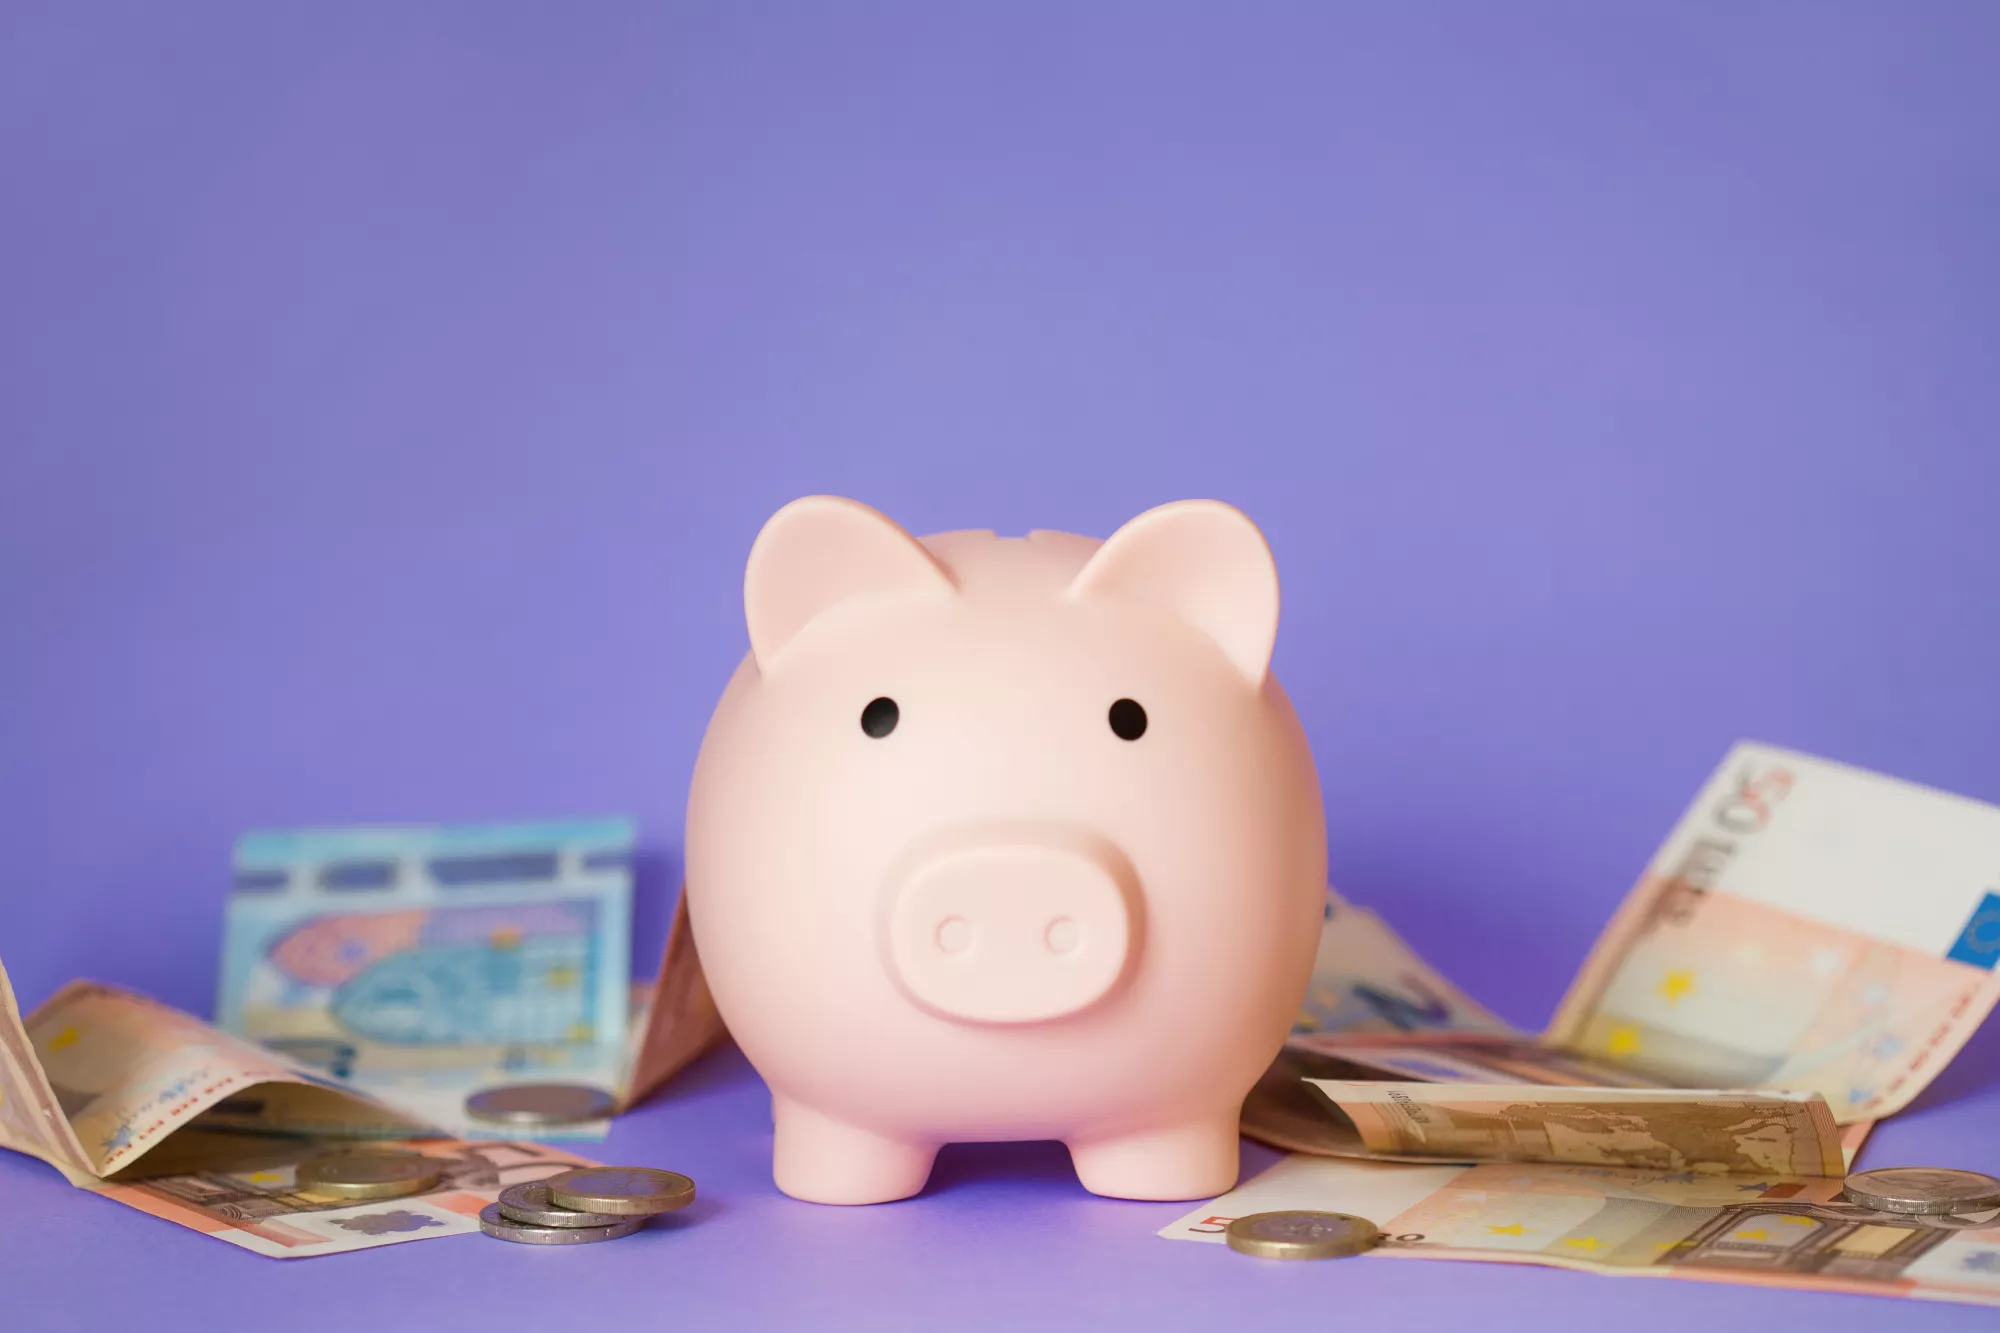 A piggy bank with money against a purple background to represent an upfront reserve as a savings account